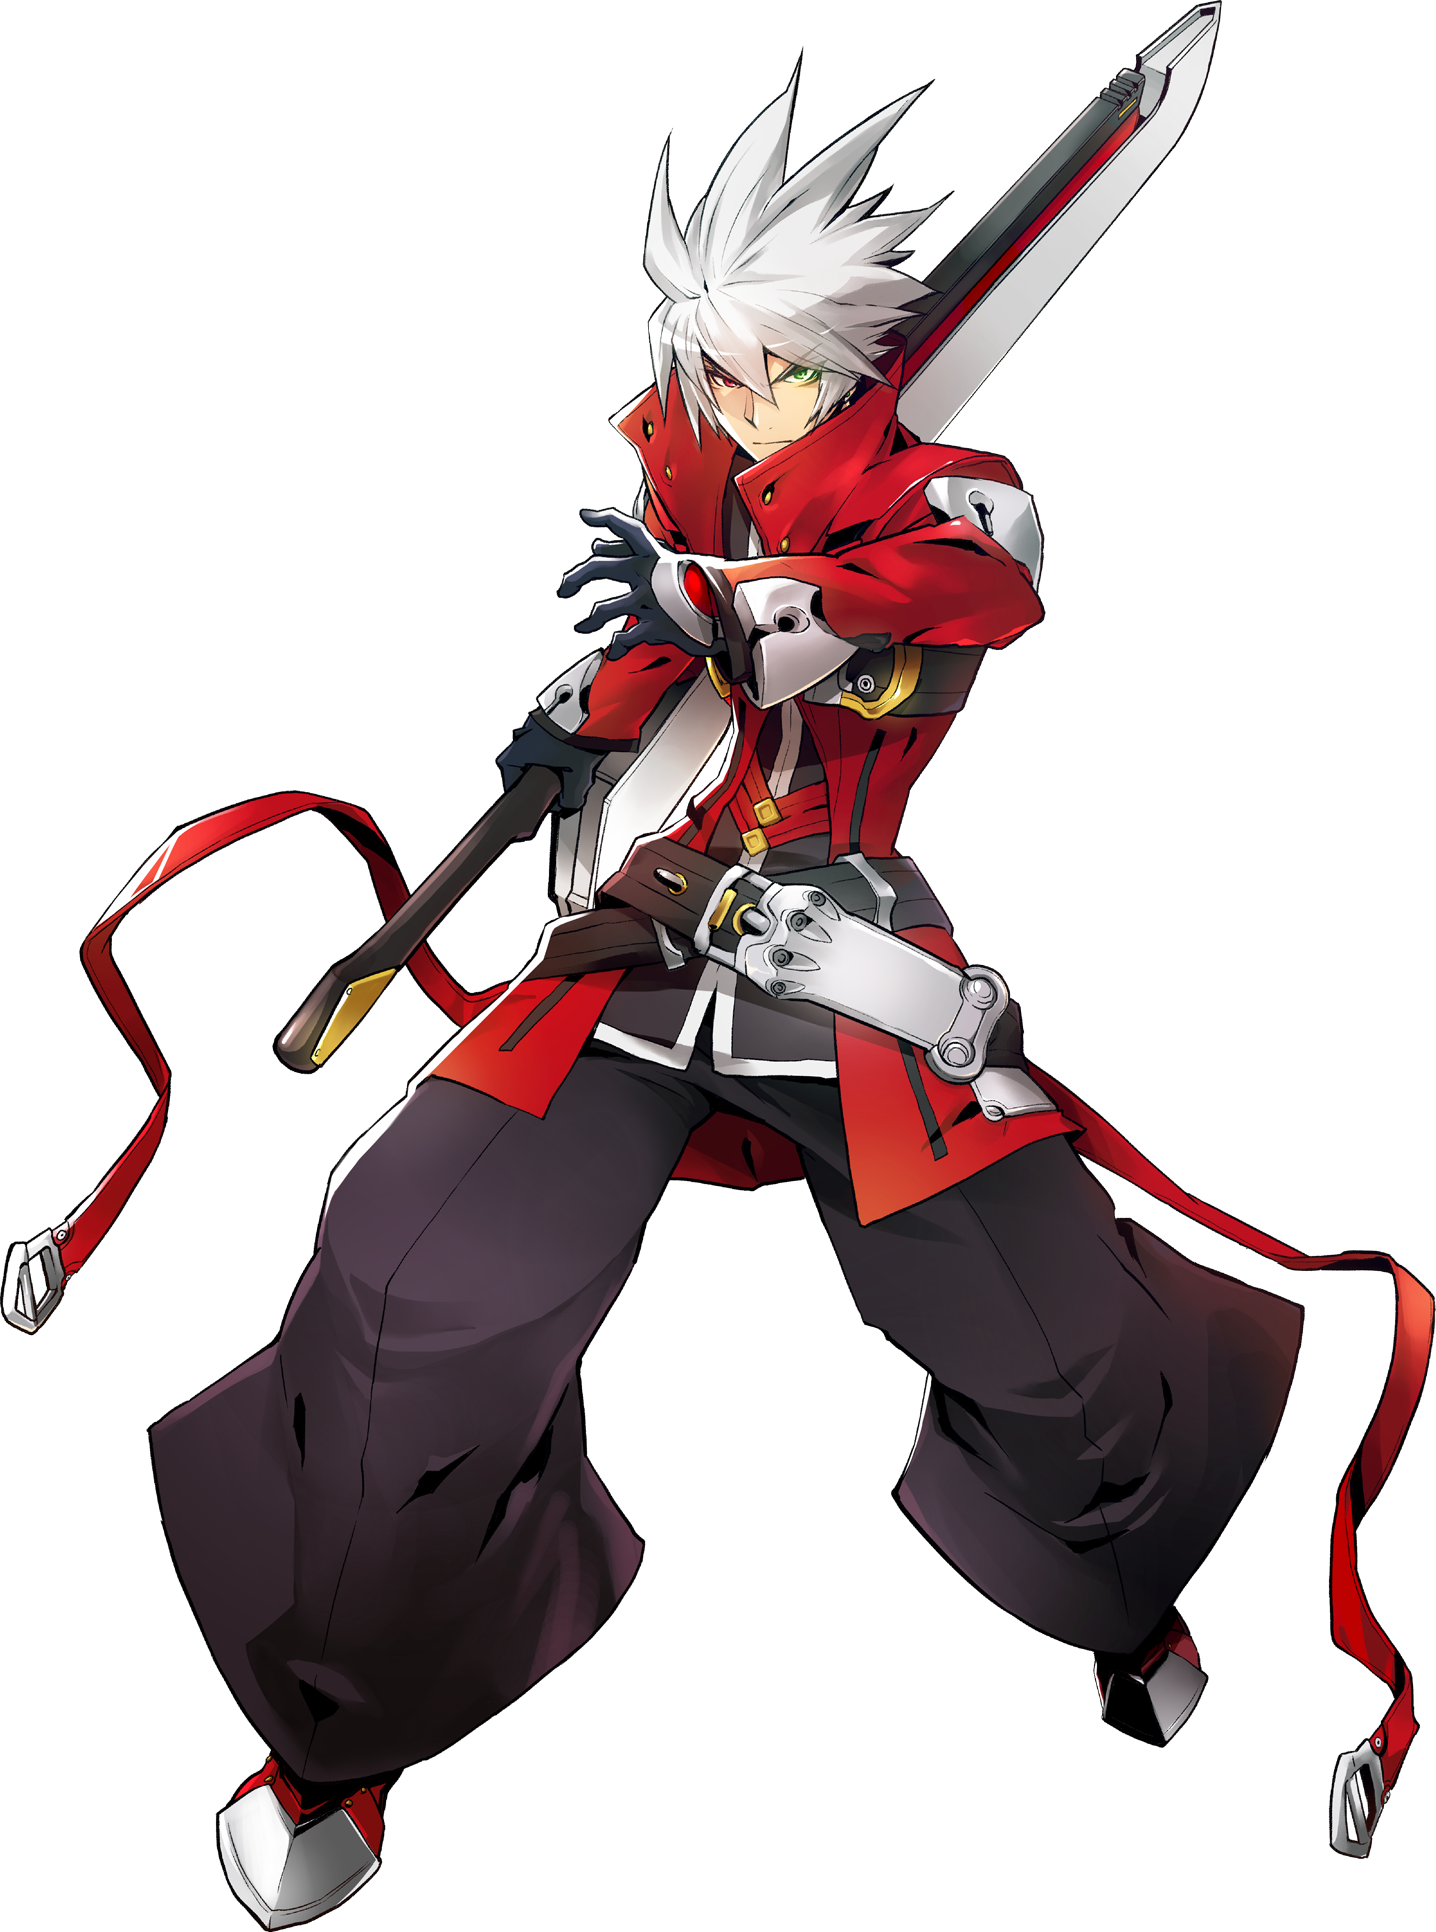 Ragna_the_Bloodedge_(Centralfiction,_Character_Select_Artwork).png